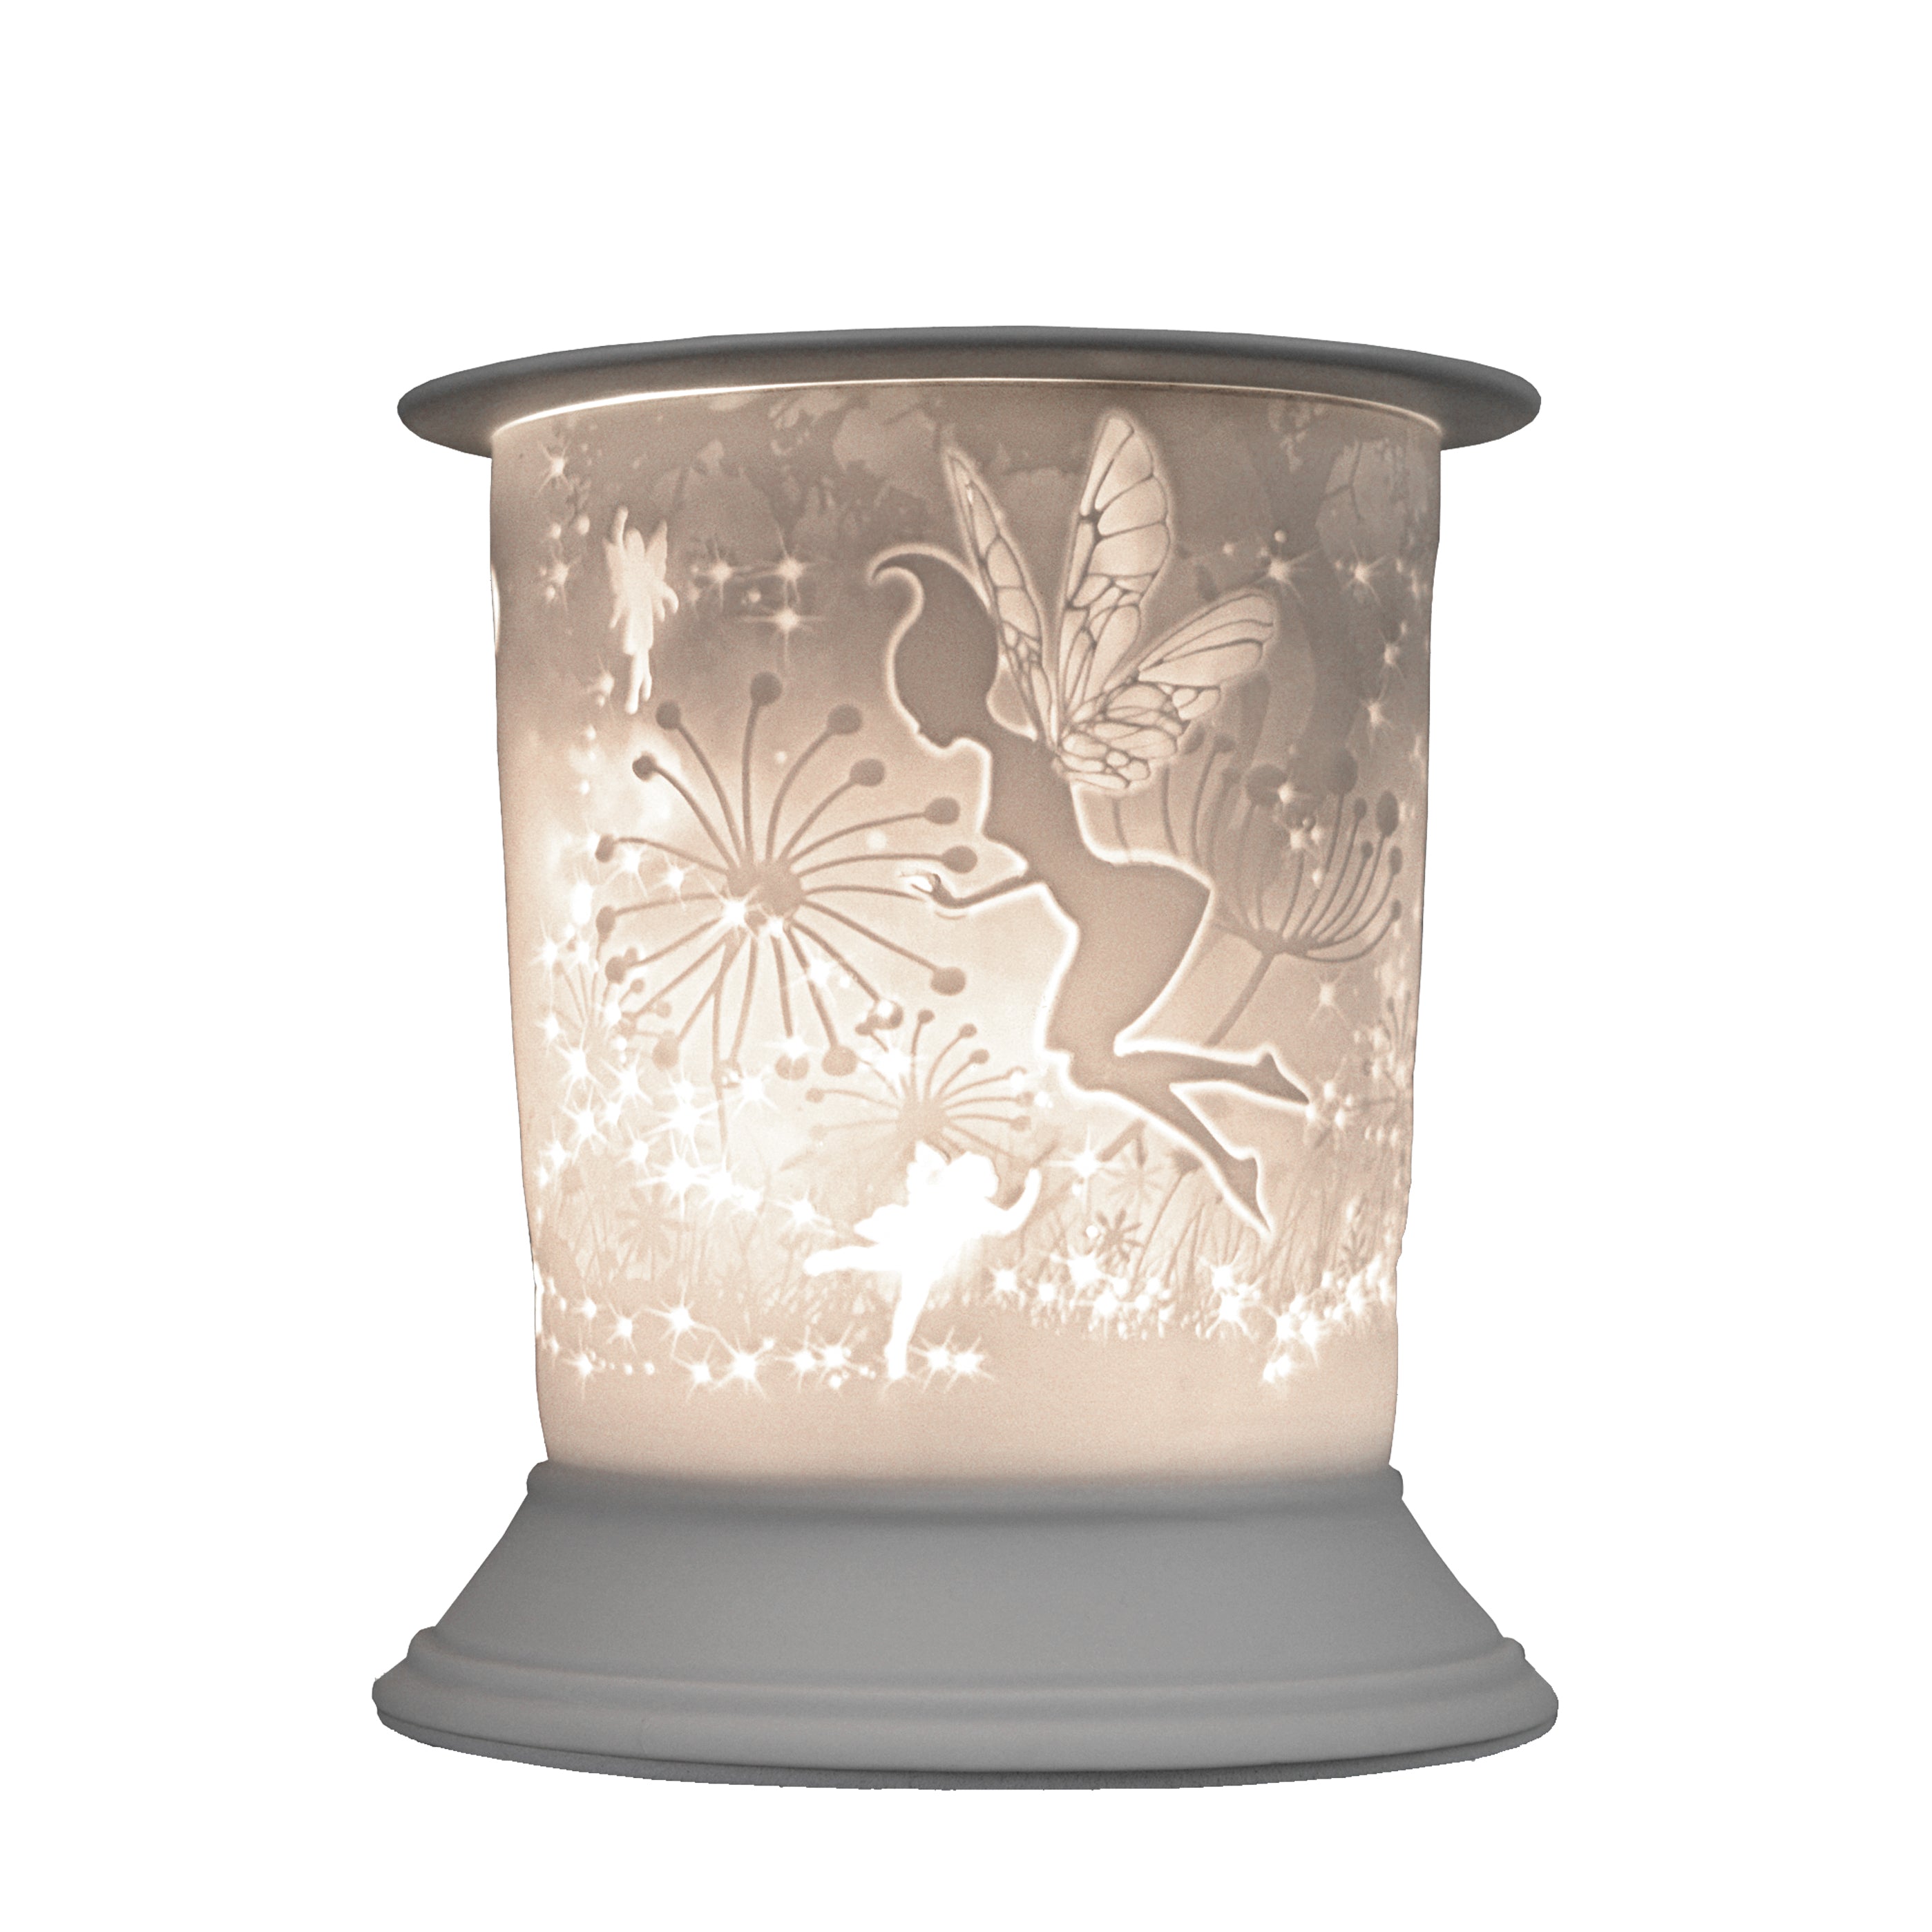 The porcelain material on this Wax Melt Burner allows bright light to shine through it, providing the opportunity to create this stunning Fairy Tale design. This is done by crafting images out of thicker and thinner sections of the porcelain, allowing for detailed shadowing and a 3D effect. The porcelains elegant look will fit perfectly in any room is available in a range of designs and two different shapes.